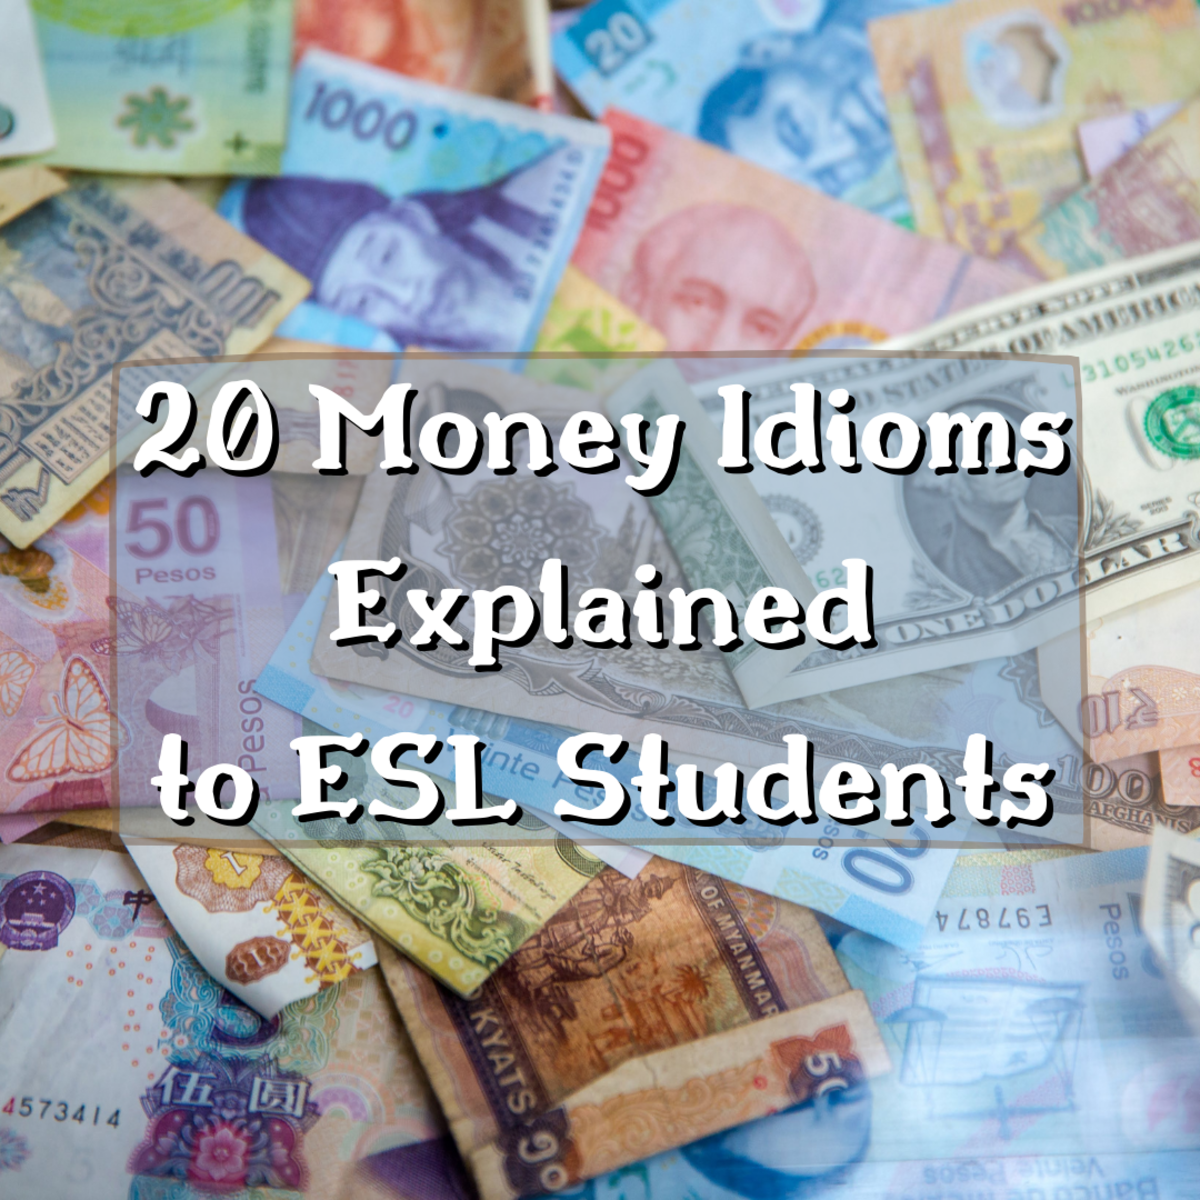 Read on to learn about 20 idioms related to money in English. Geared for ESL students, this article will help all learners improve their understanding of the English language.